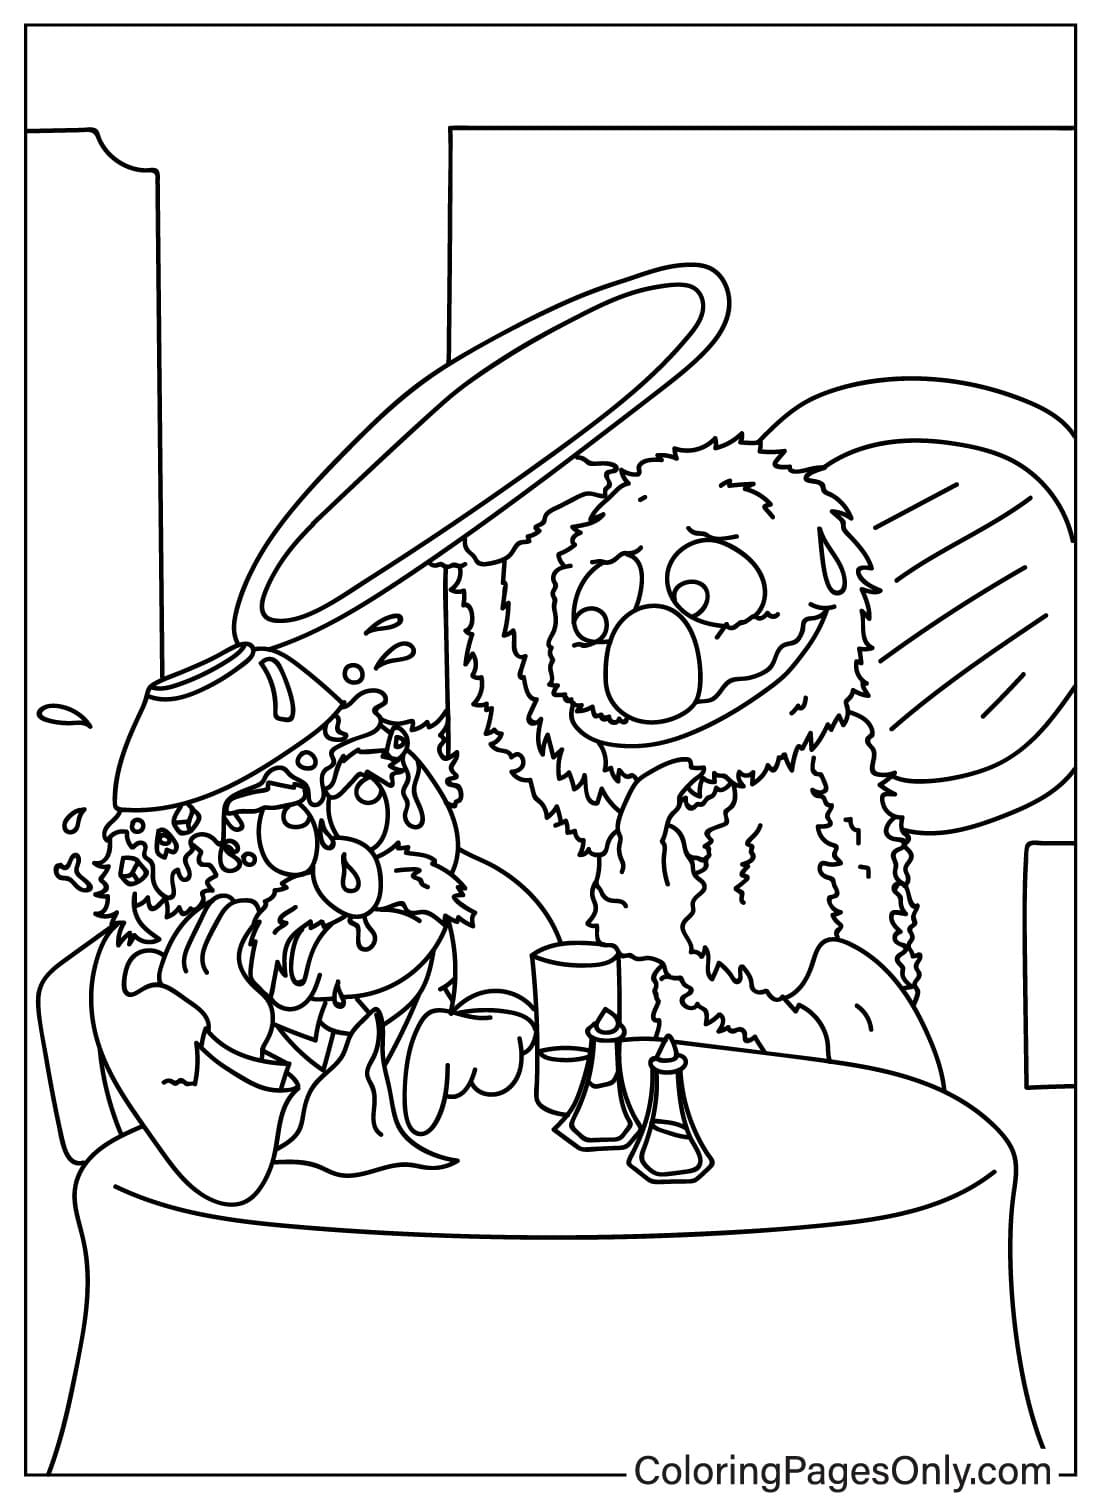 Images Grover Coloring Page